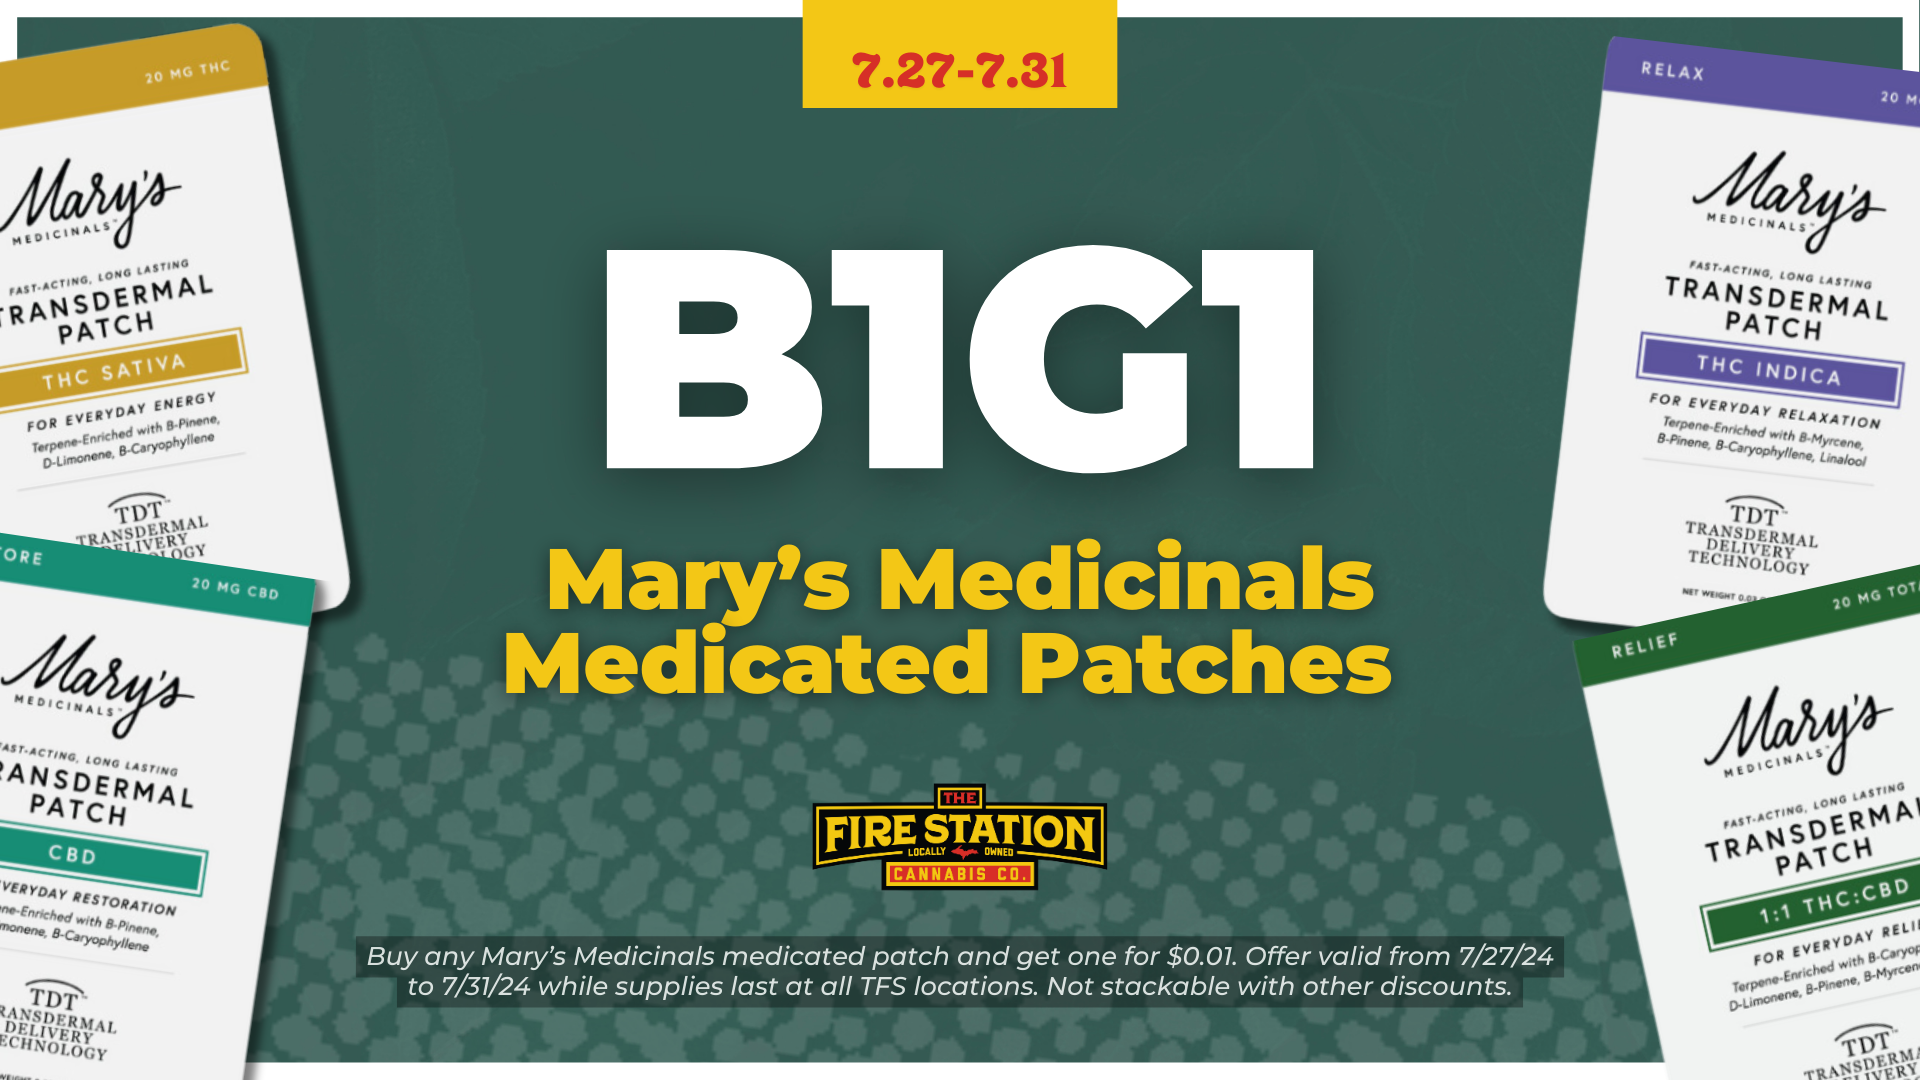 Buy any Mary’s Medicinals medicated patch and get one for $0.01. Offer valid from 7/27/24 to 7/31/24 while supplies last at all TFS locations. Not stackable with other discounts.